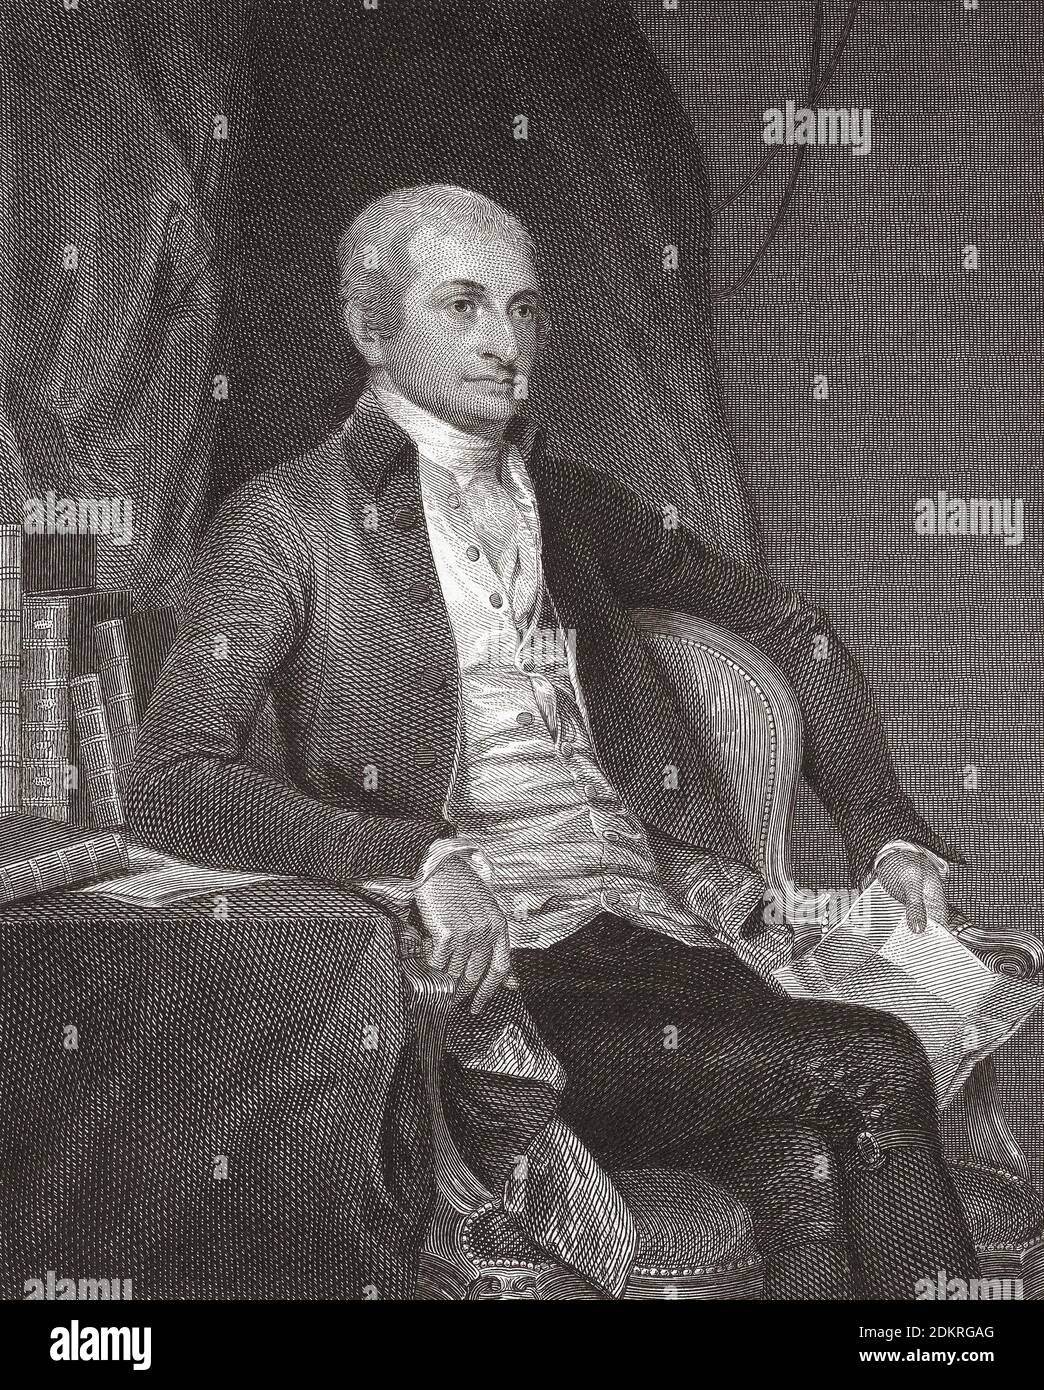 John Jay, 1745 - 1829. American statesman.  He was a Founding Father, an abolitionist and signatory of the 1783 Treaty of Paris. He was the first Chief Justice of the United States and the second Governor of New York.  After an engraving by Asher Brown Durand from a work by Gilbert Stuart. Stock Photo